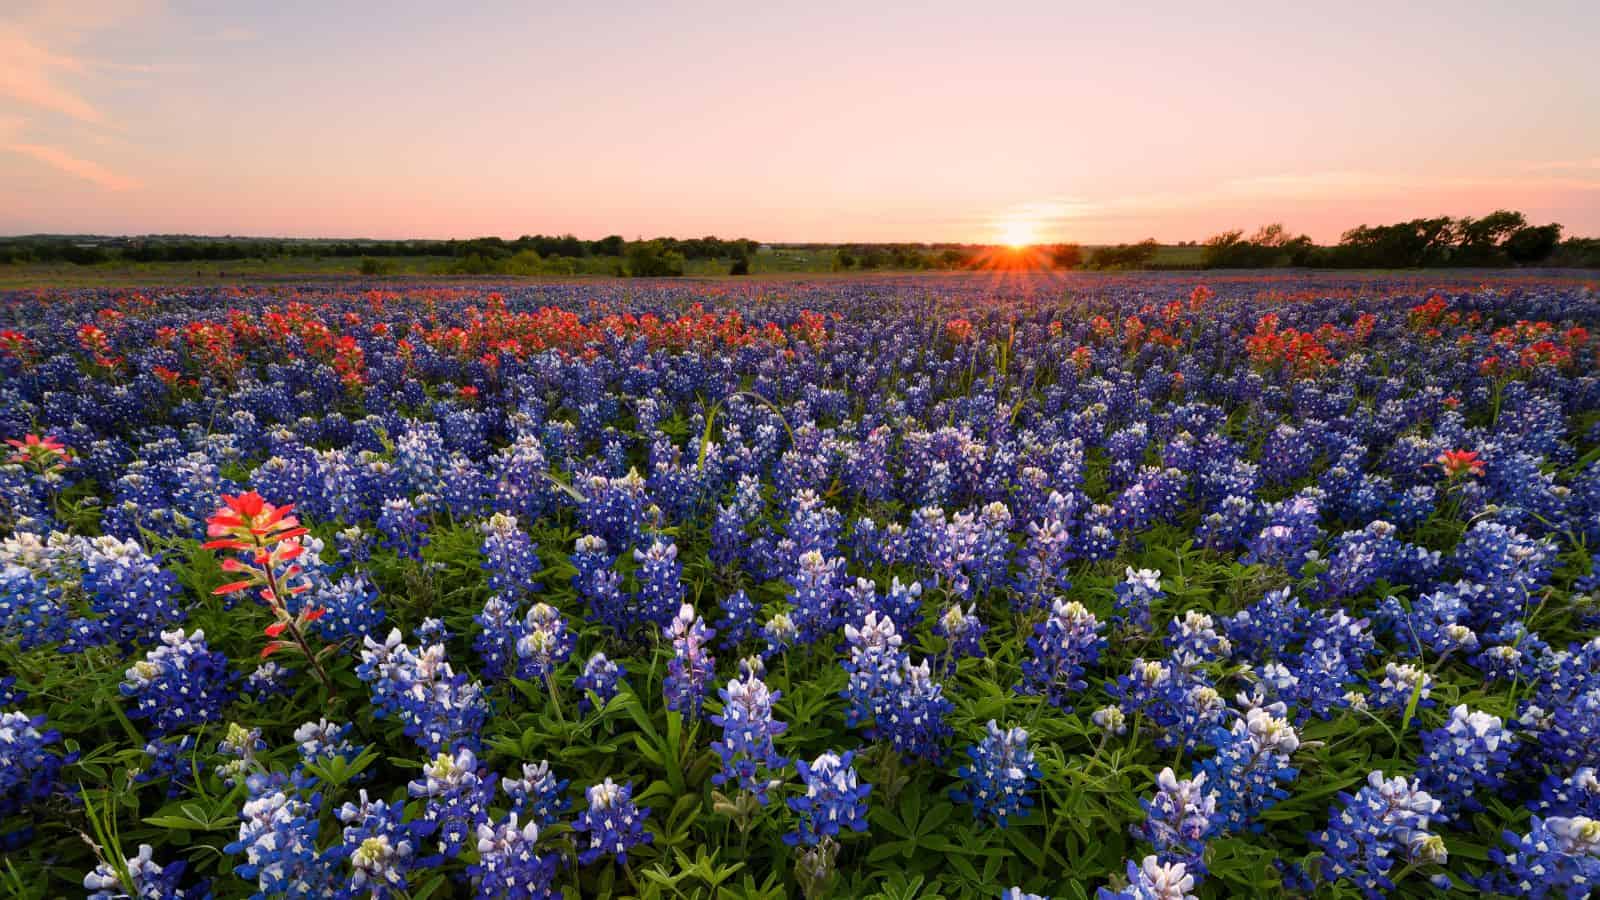 <p>Experience the beauty of Texas Hill Country on the Bluebonnet Trail, where you’ll be surrounded by fields of vibrant bluebonnet wildflowers in the spring.</p><p>This scenic route stretches through the heart of Texas, passing through sweet small towns like Fredericksburg, Burnet, and Marble Falls.</p><p>Enjoy the peacefulness of the Texas countryside, explore local wineries, and indulge in authentic Texas barbecue. The Bluebonnet Trail is particularly stunning in the spring when the wildflowers are in full bloom, creating a colorful landscape that is truly a sight to behold.</p>